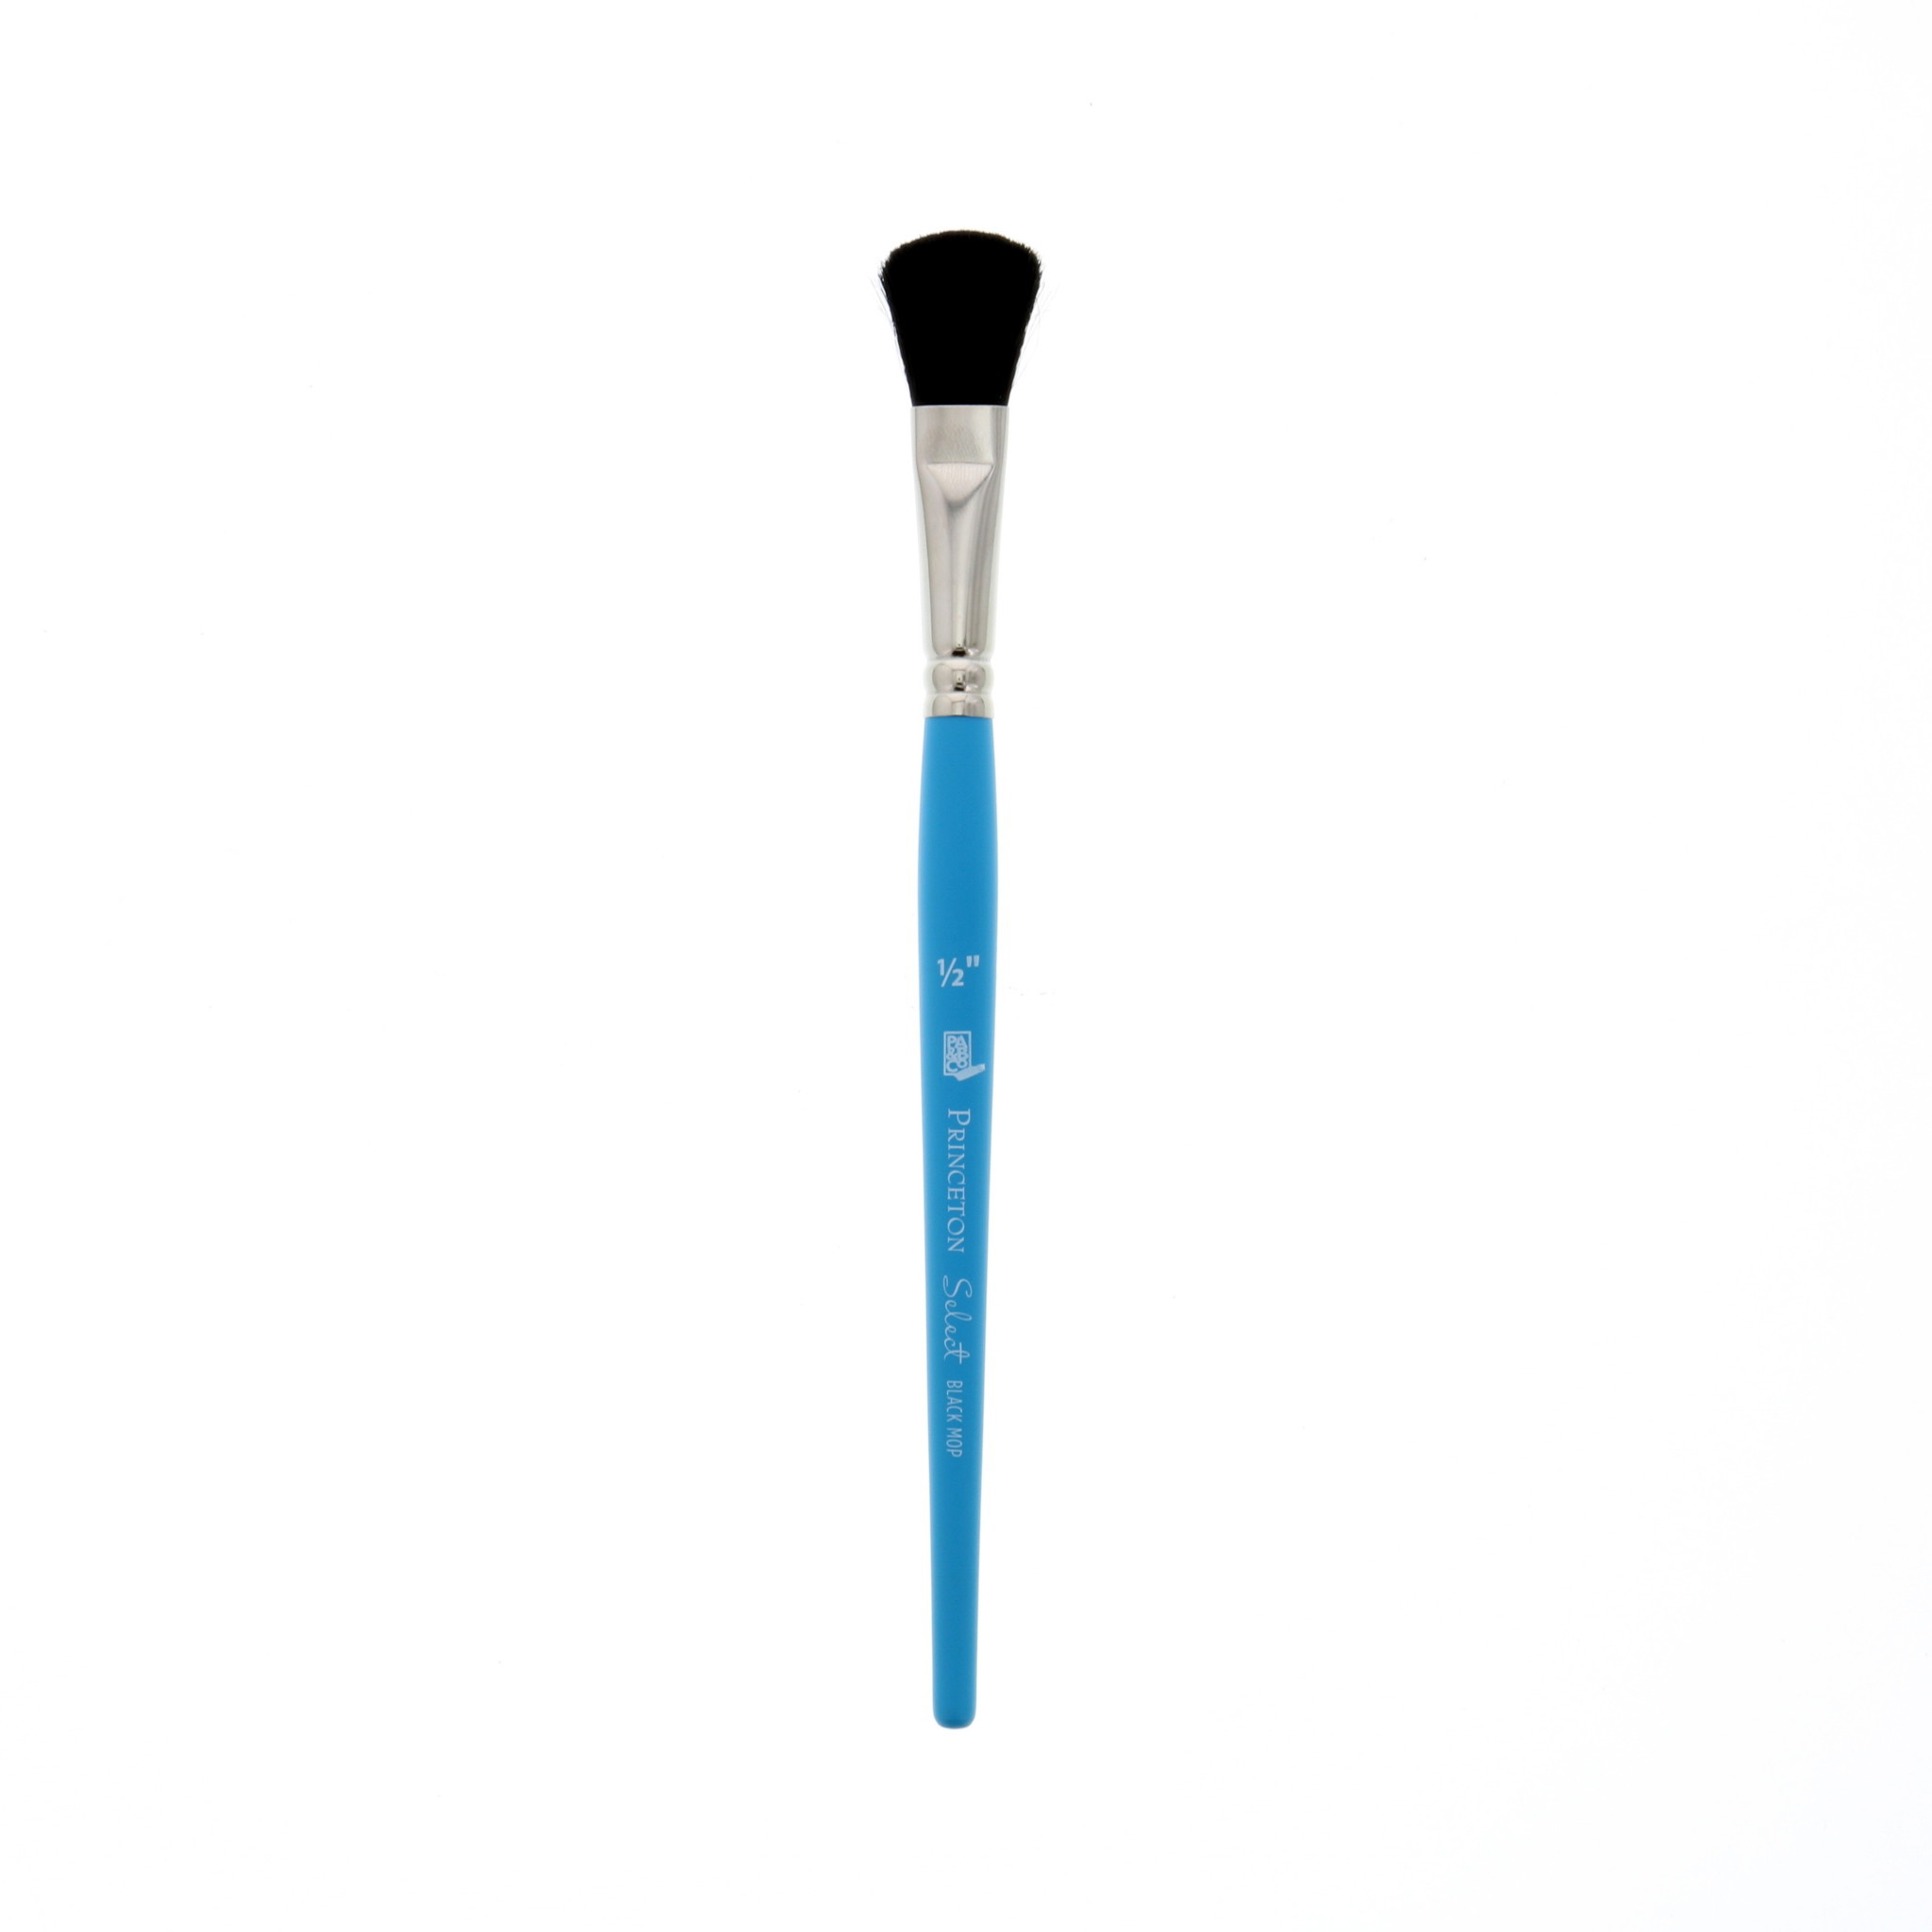 Blending Acrylic Paint With The Select Artiste™ Black Mop Brush 